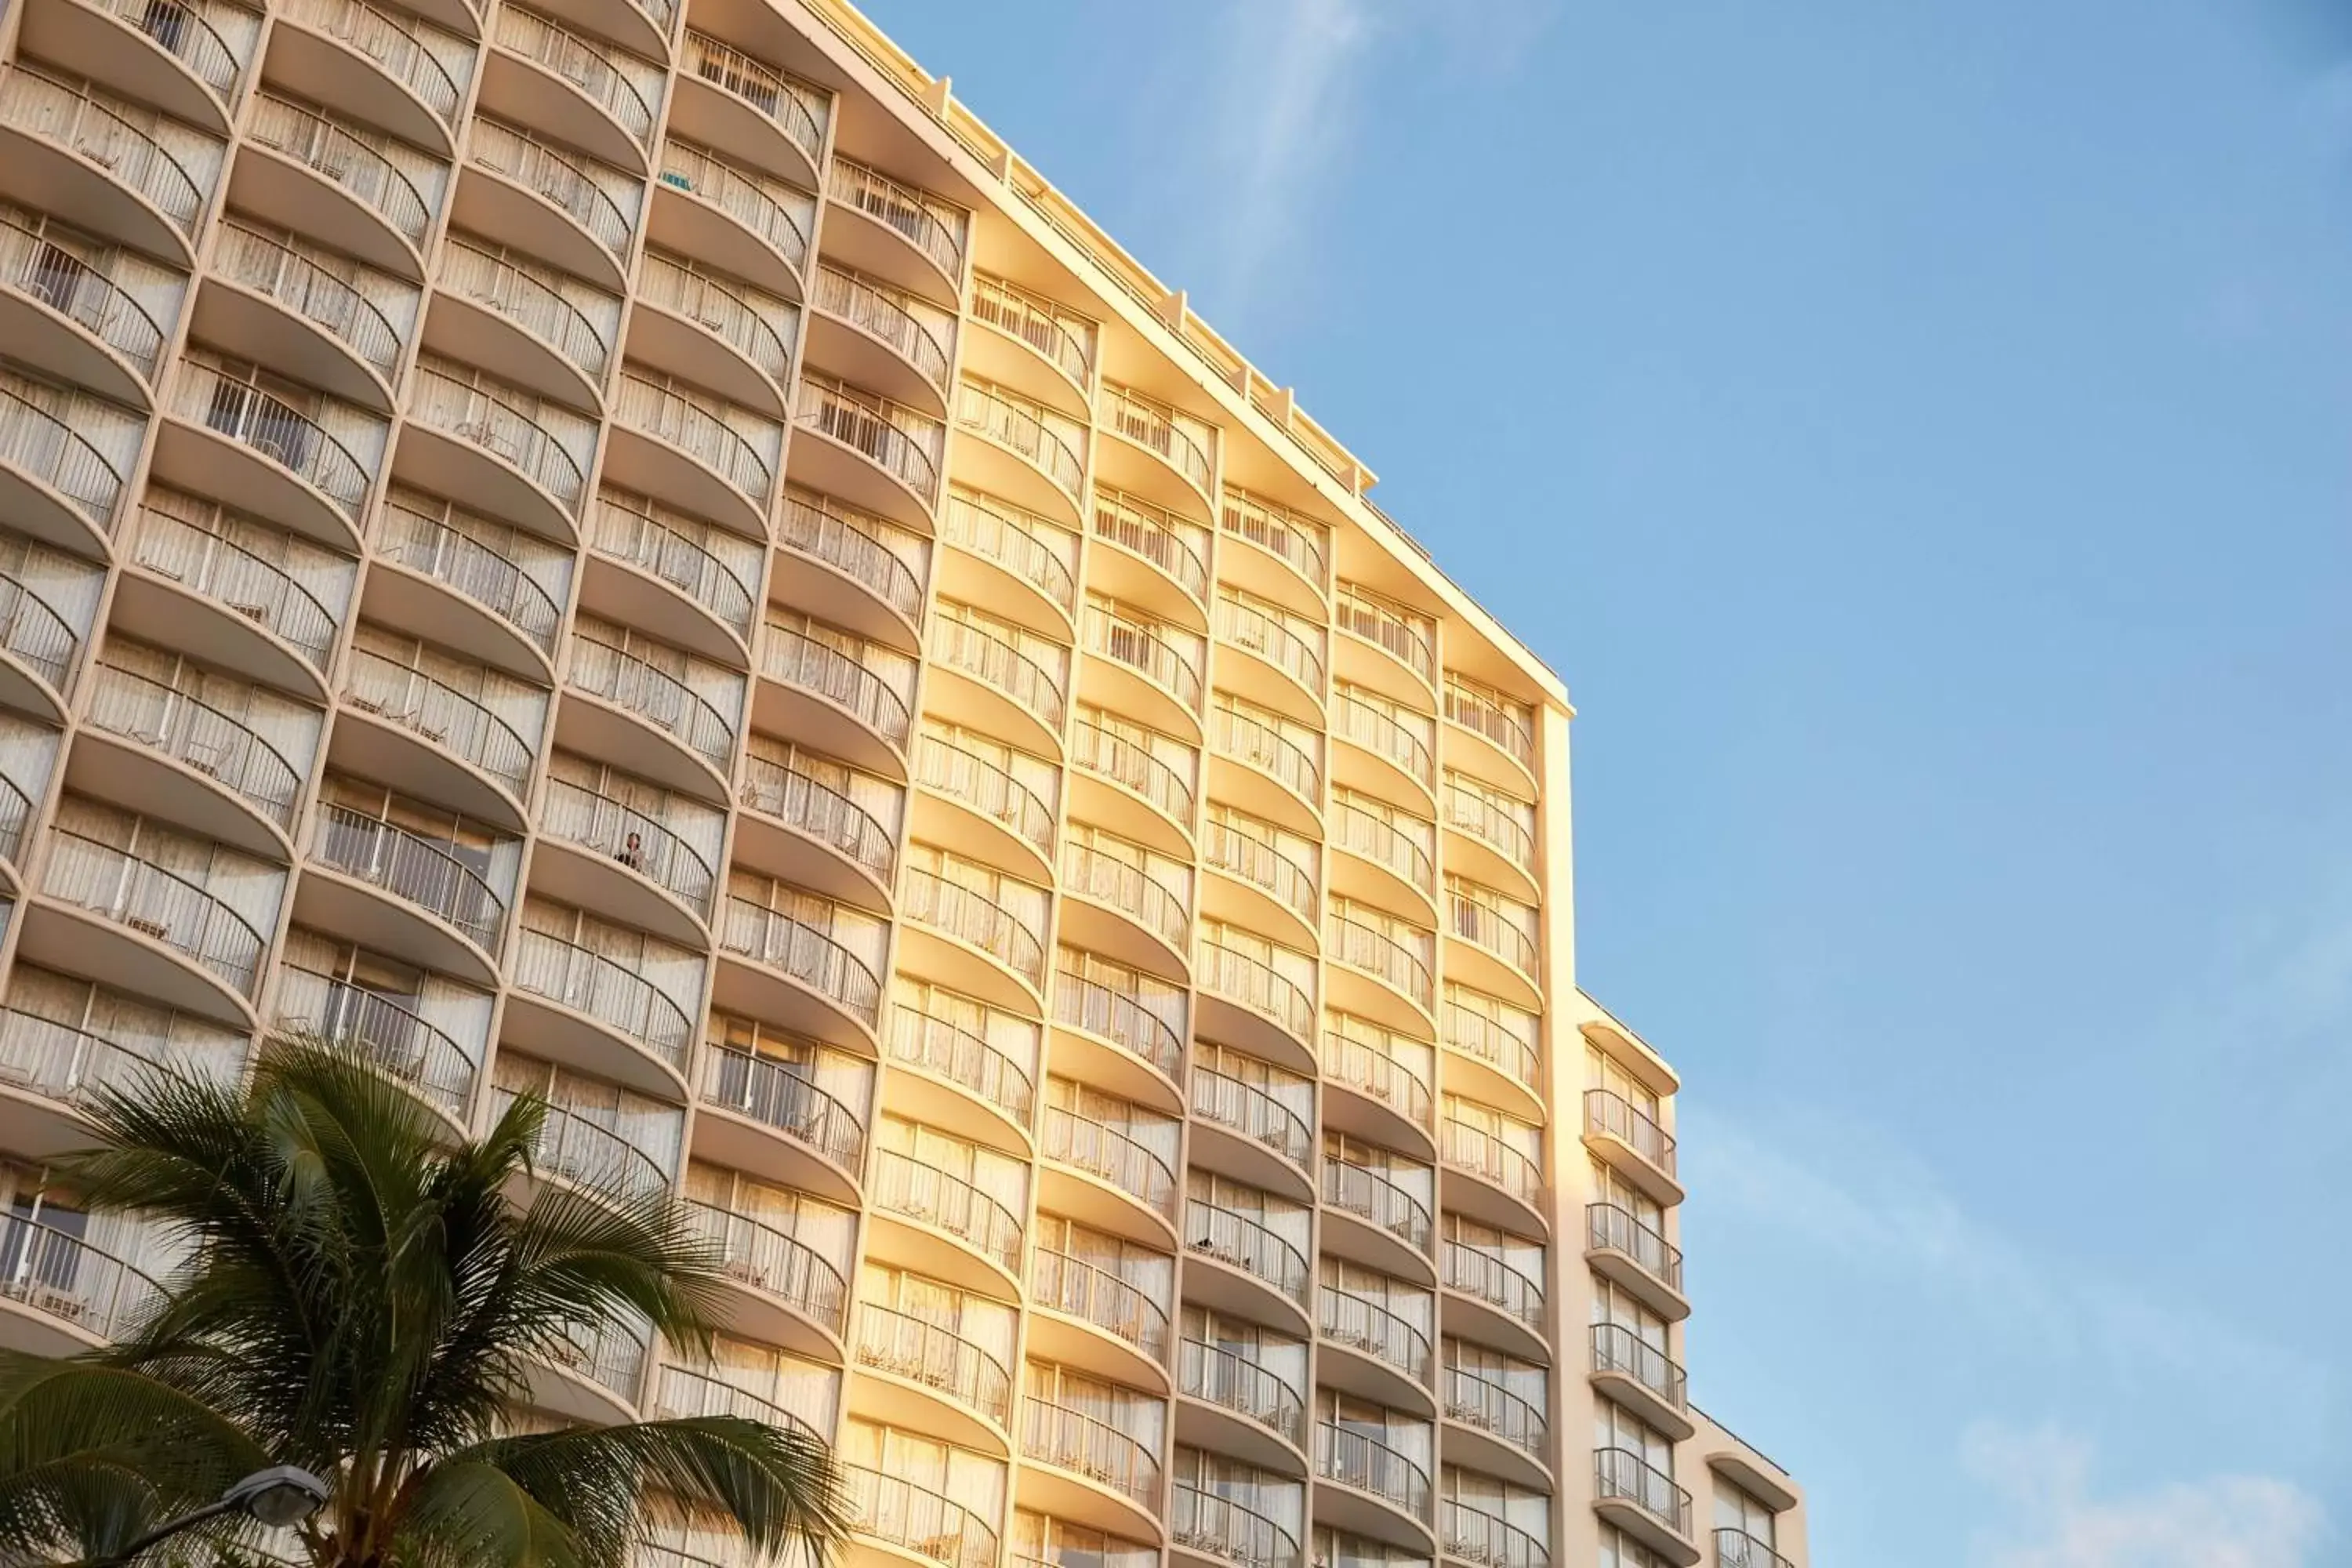 Bird's eye view, Property Building in OHANA Waikiki East by OUTRIGGER